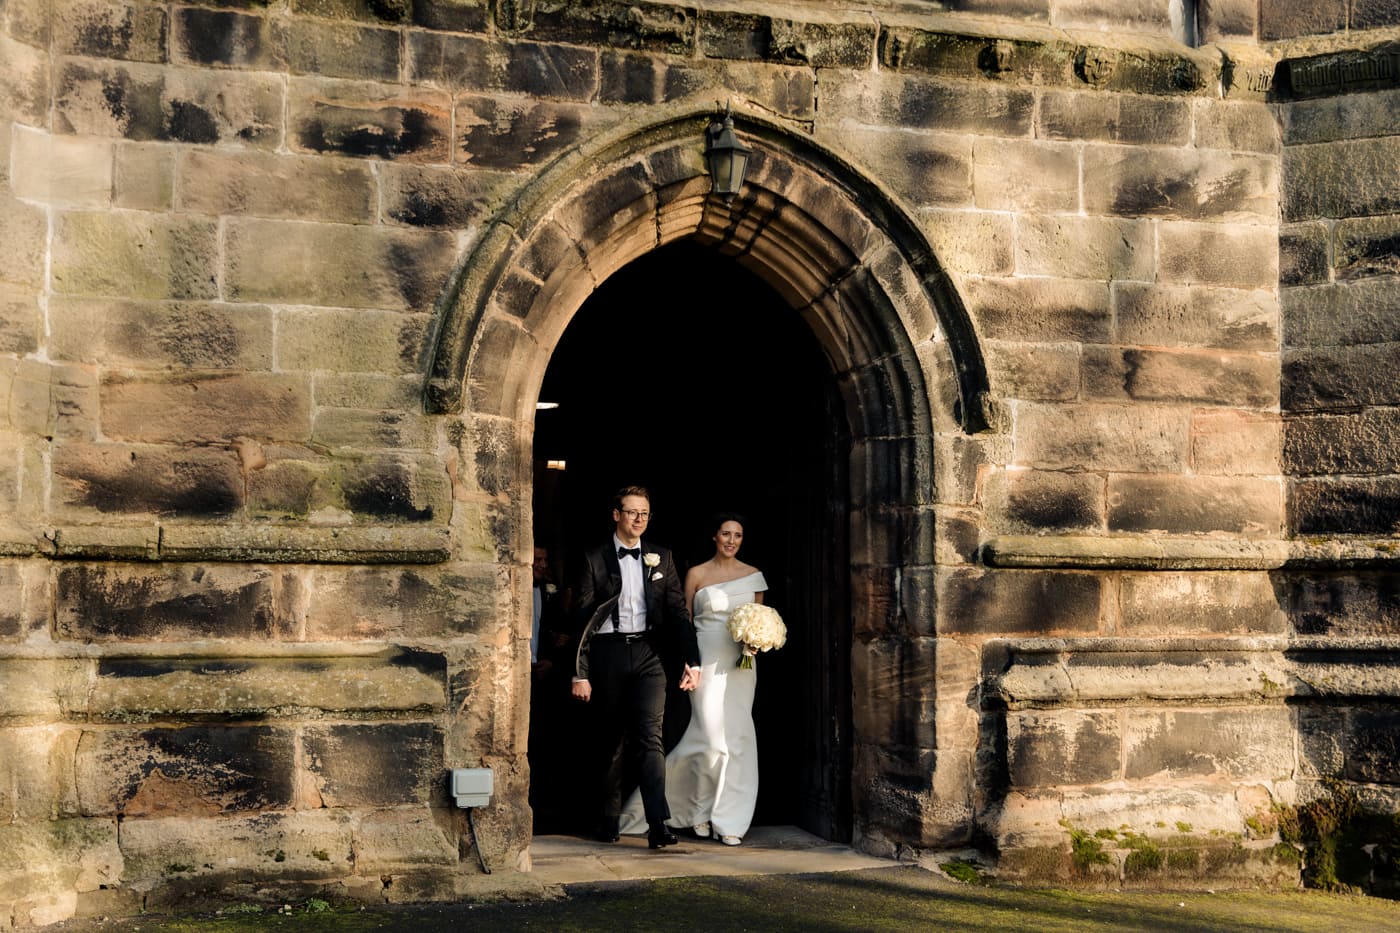 The church inn mobberley wedding and reception. Small intimate wedding in cheshire.